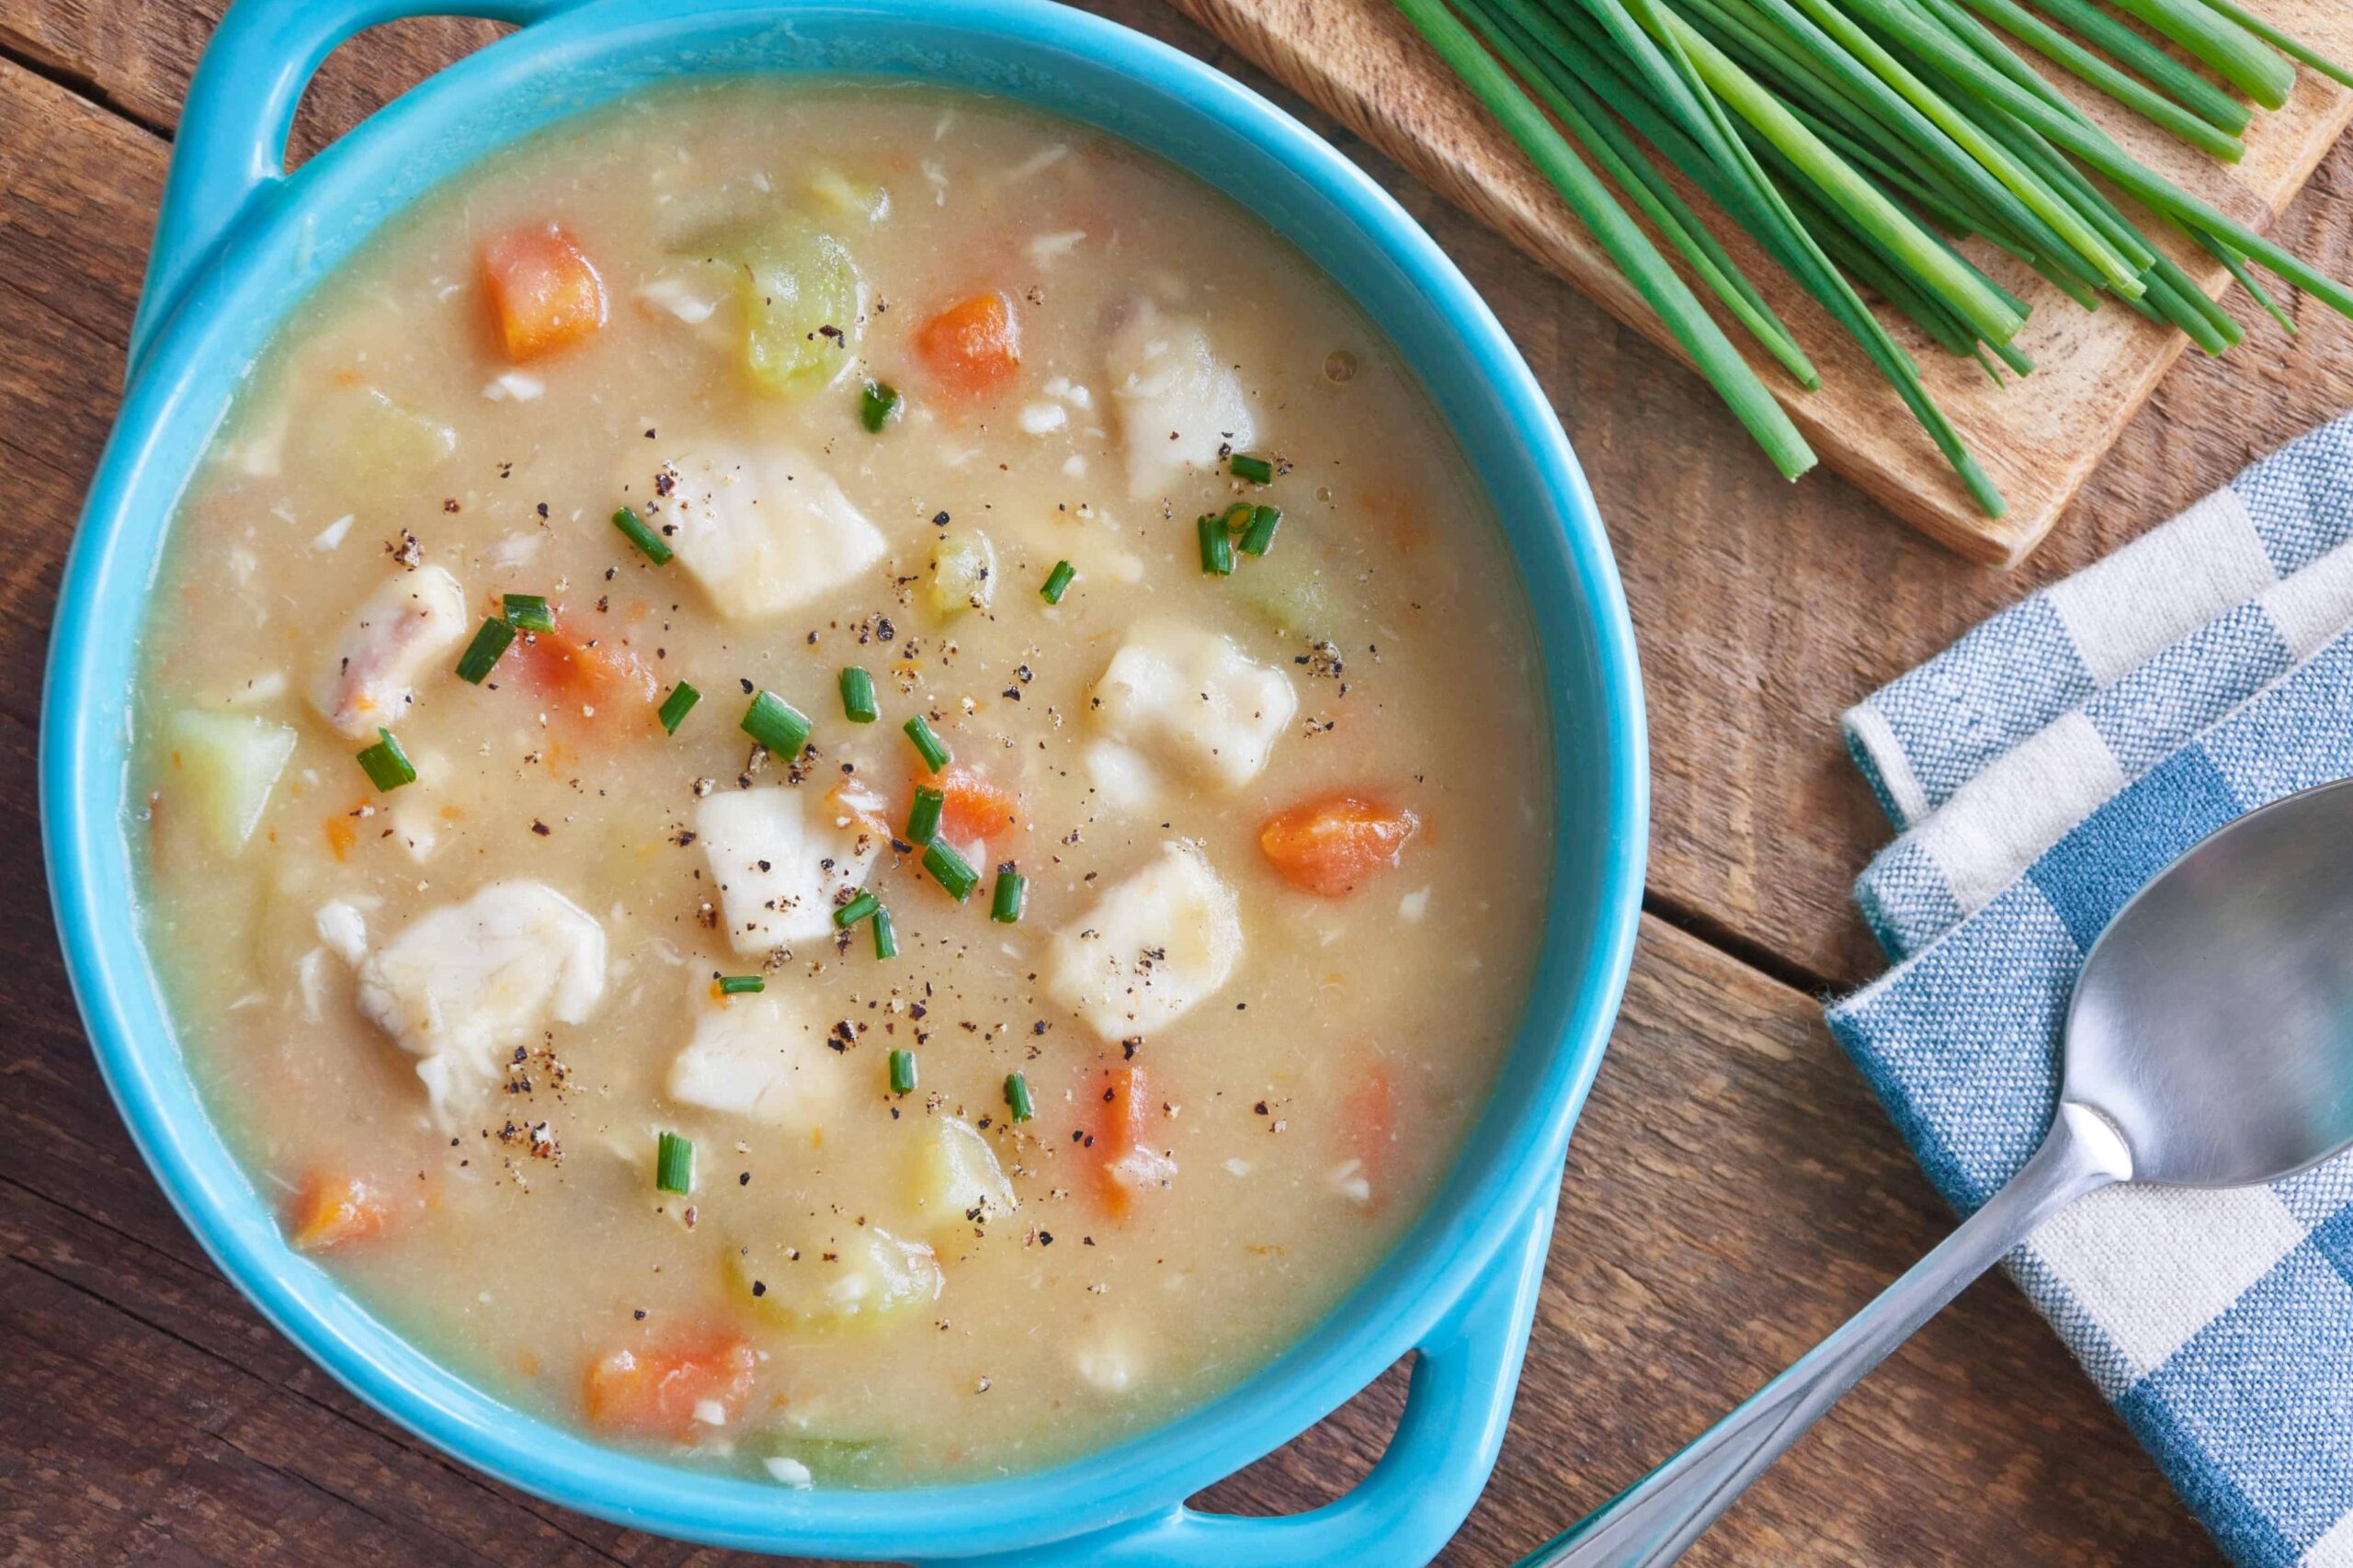  Dive into a bowl of creamy dairy-free Fish Chowder!